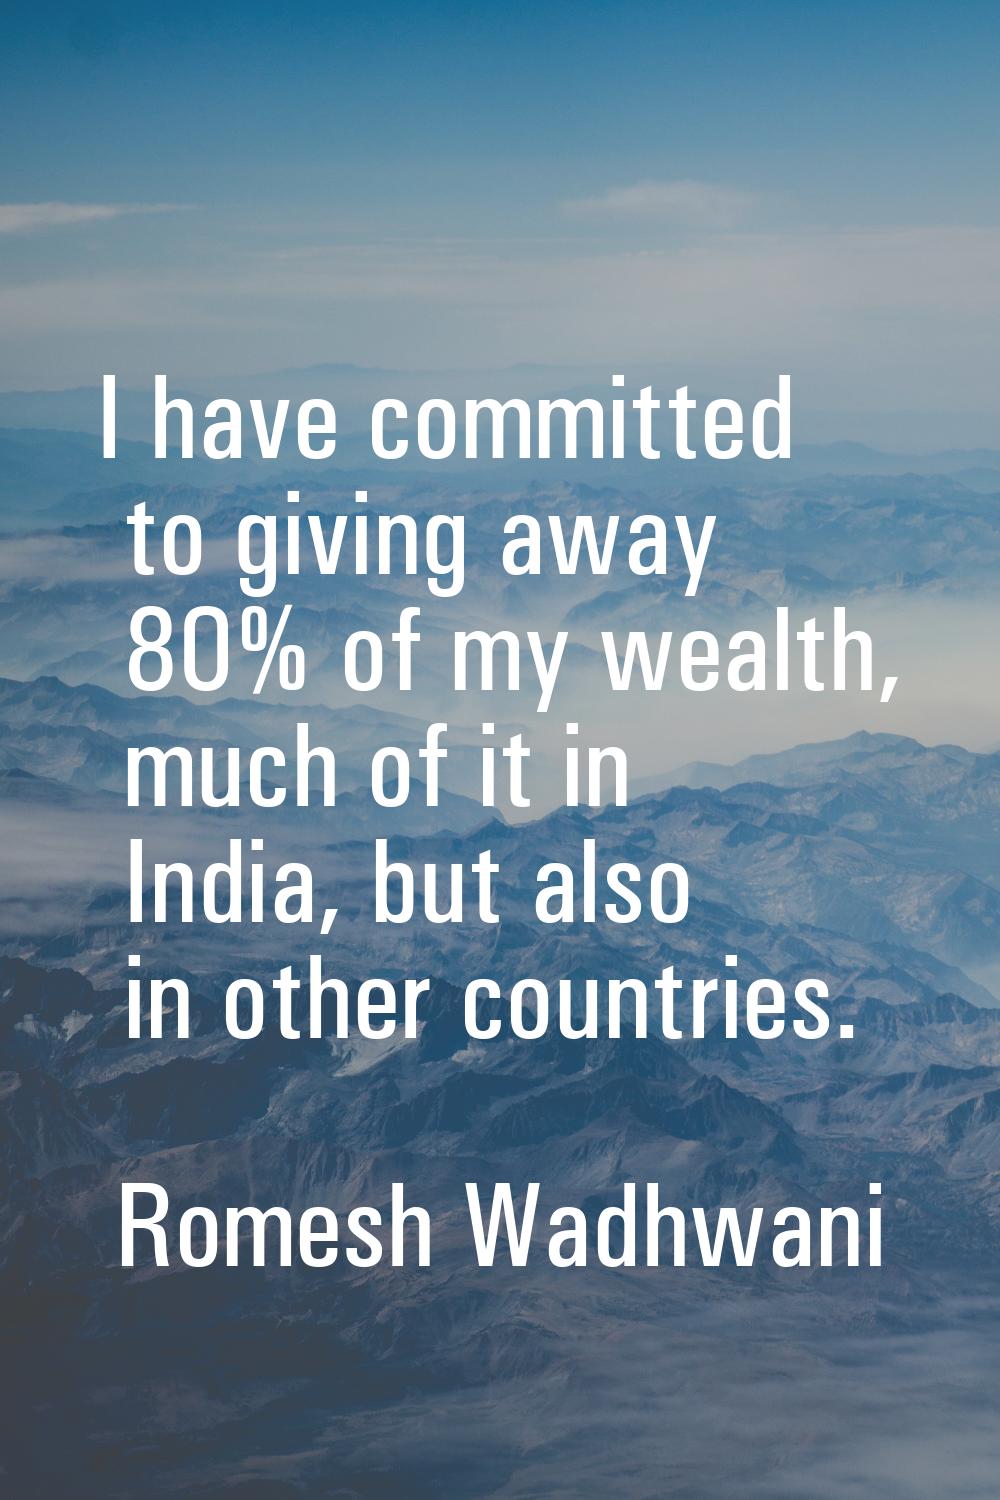 I have committed to giving away 80% of my wealth, much of it in India, but also in other countries.